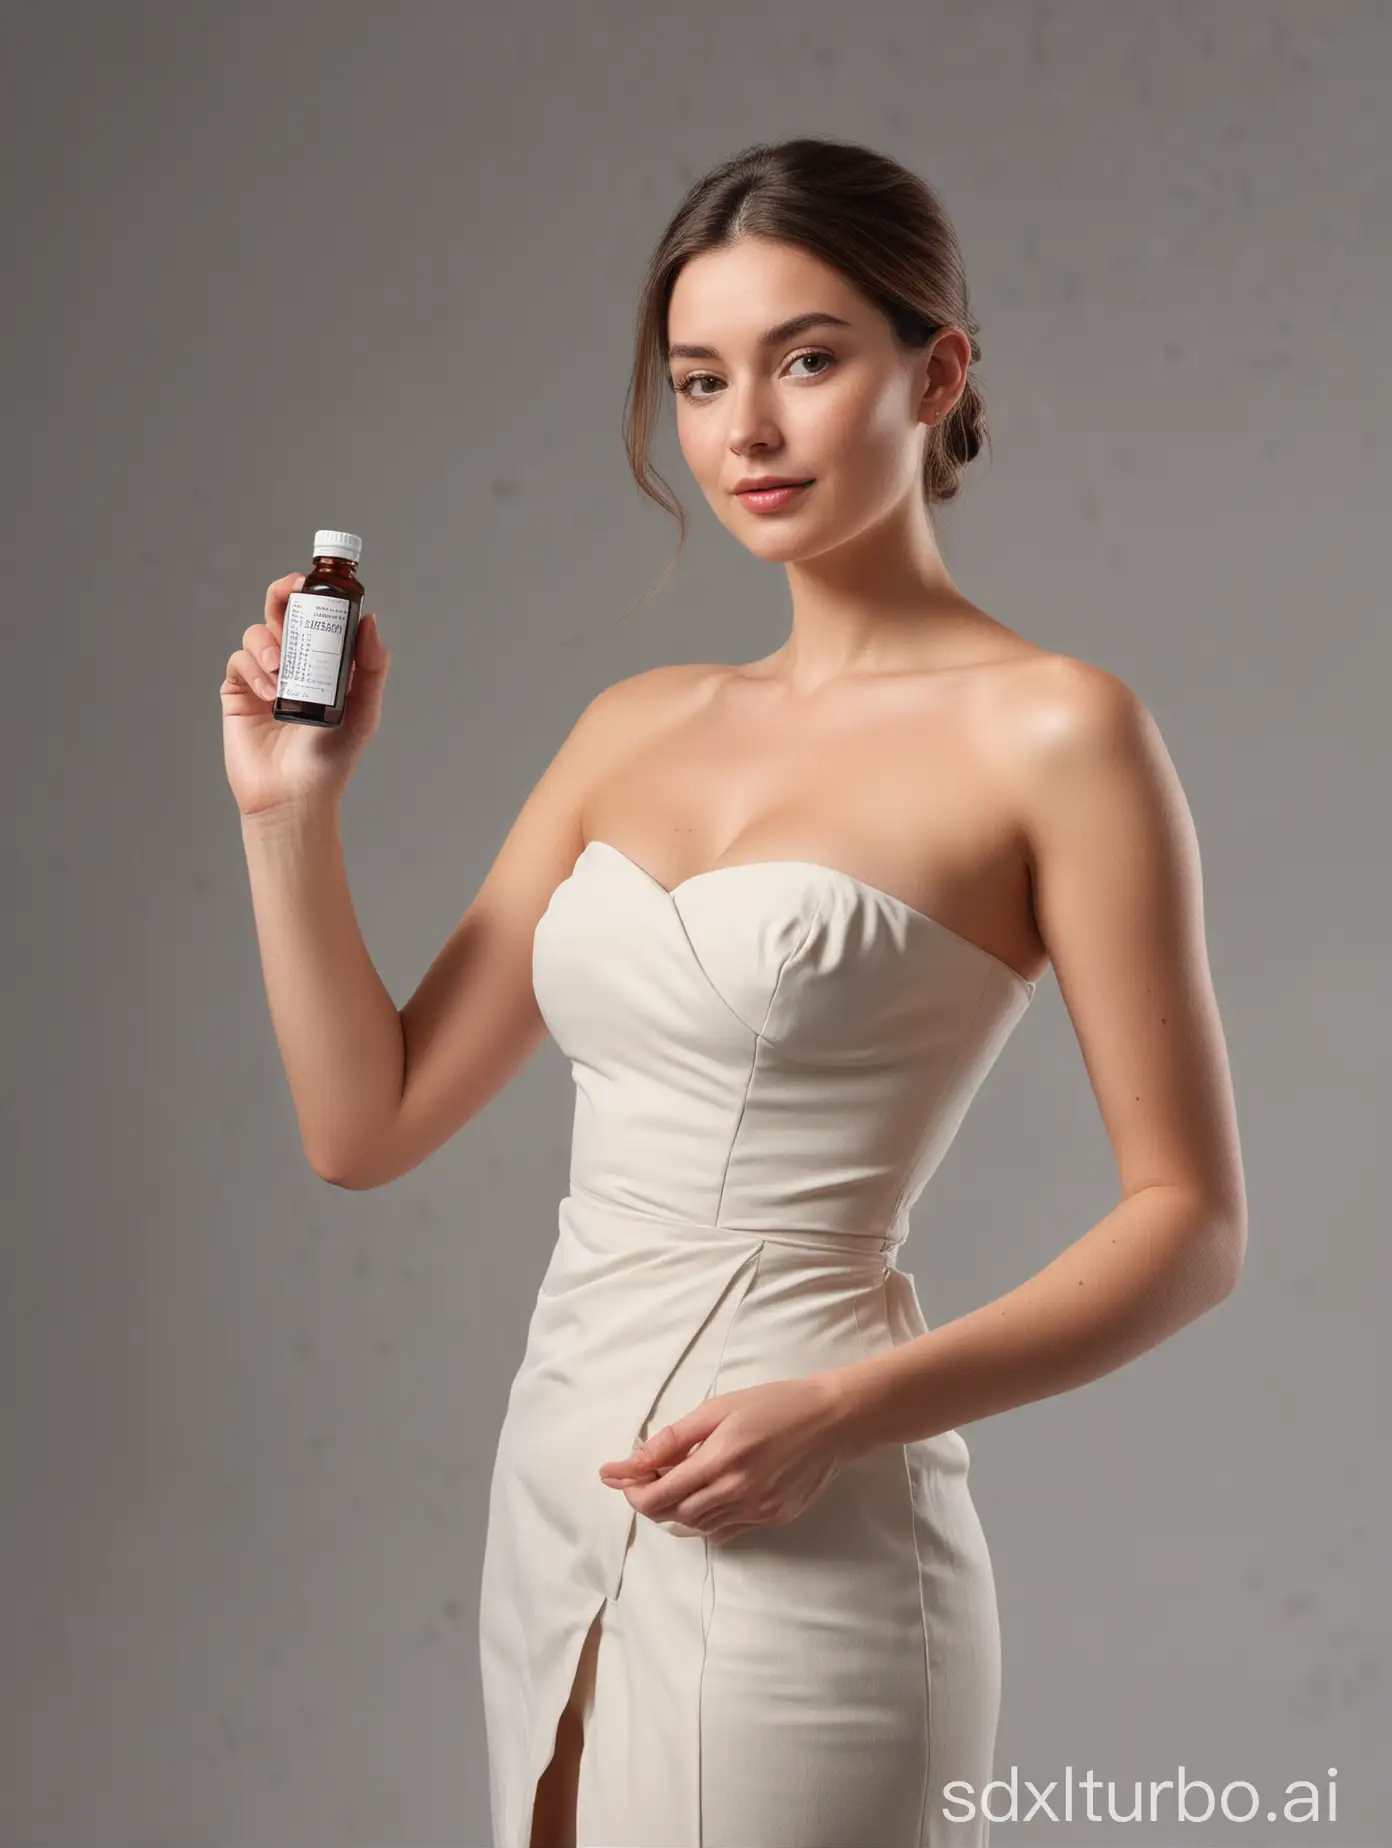 wearing a strapless dress, holding a medicine bottle in her left hand, while her right hand is placed on her hip, elegant posture, confident expression, gracefully showcasing the label to the viewer with a steady hand, fingers delicately tracing the details on the label, precise hand positioning, healthcare product presentation, indoor studio setting, bright lighting, high-quality image